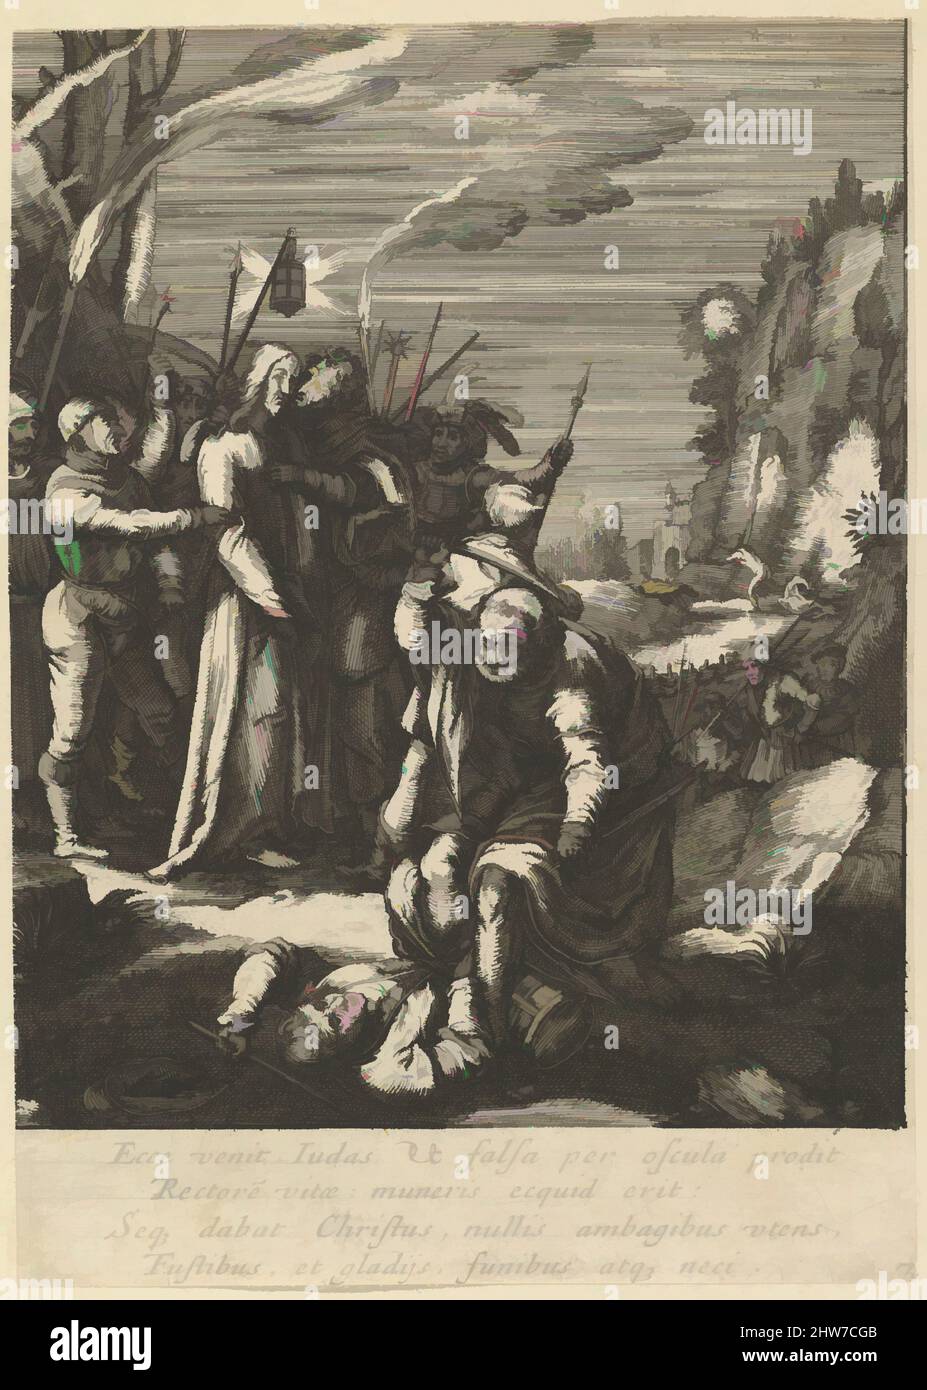 Art inspired by The Betrayal of Christ, from The Passion of Christ, mid 17th century, Etching, Sheet: 5 7/16 × 38 3/16 in. (13.8 × 97 cm), Prints, Nicolas Cochin (French, Troyes 1610–1686 Paris), After Hendrick Goltzius (Netherlandish, Mühlbracht 1558–1617 Haarlem, Classic works modernized by Artotop with a splash of modernity. Shapes, color and value, eye-catching visual impact on art. Emotions through freedom of artworks in a contemporary way. A timeless message pursuing a wildly creative new direction. Artists turning to the digital medium and creating the Artotop NFT Stock Photo